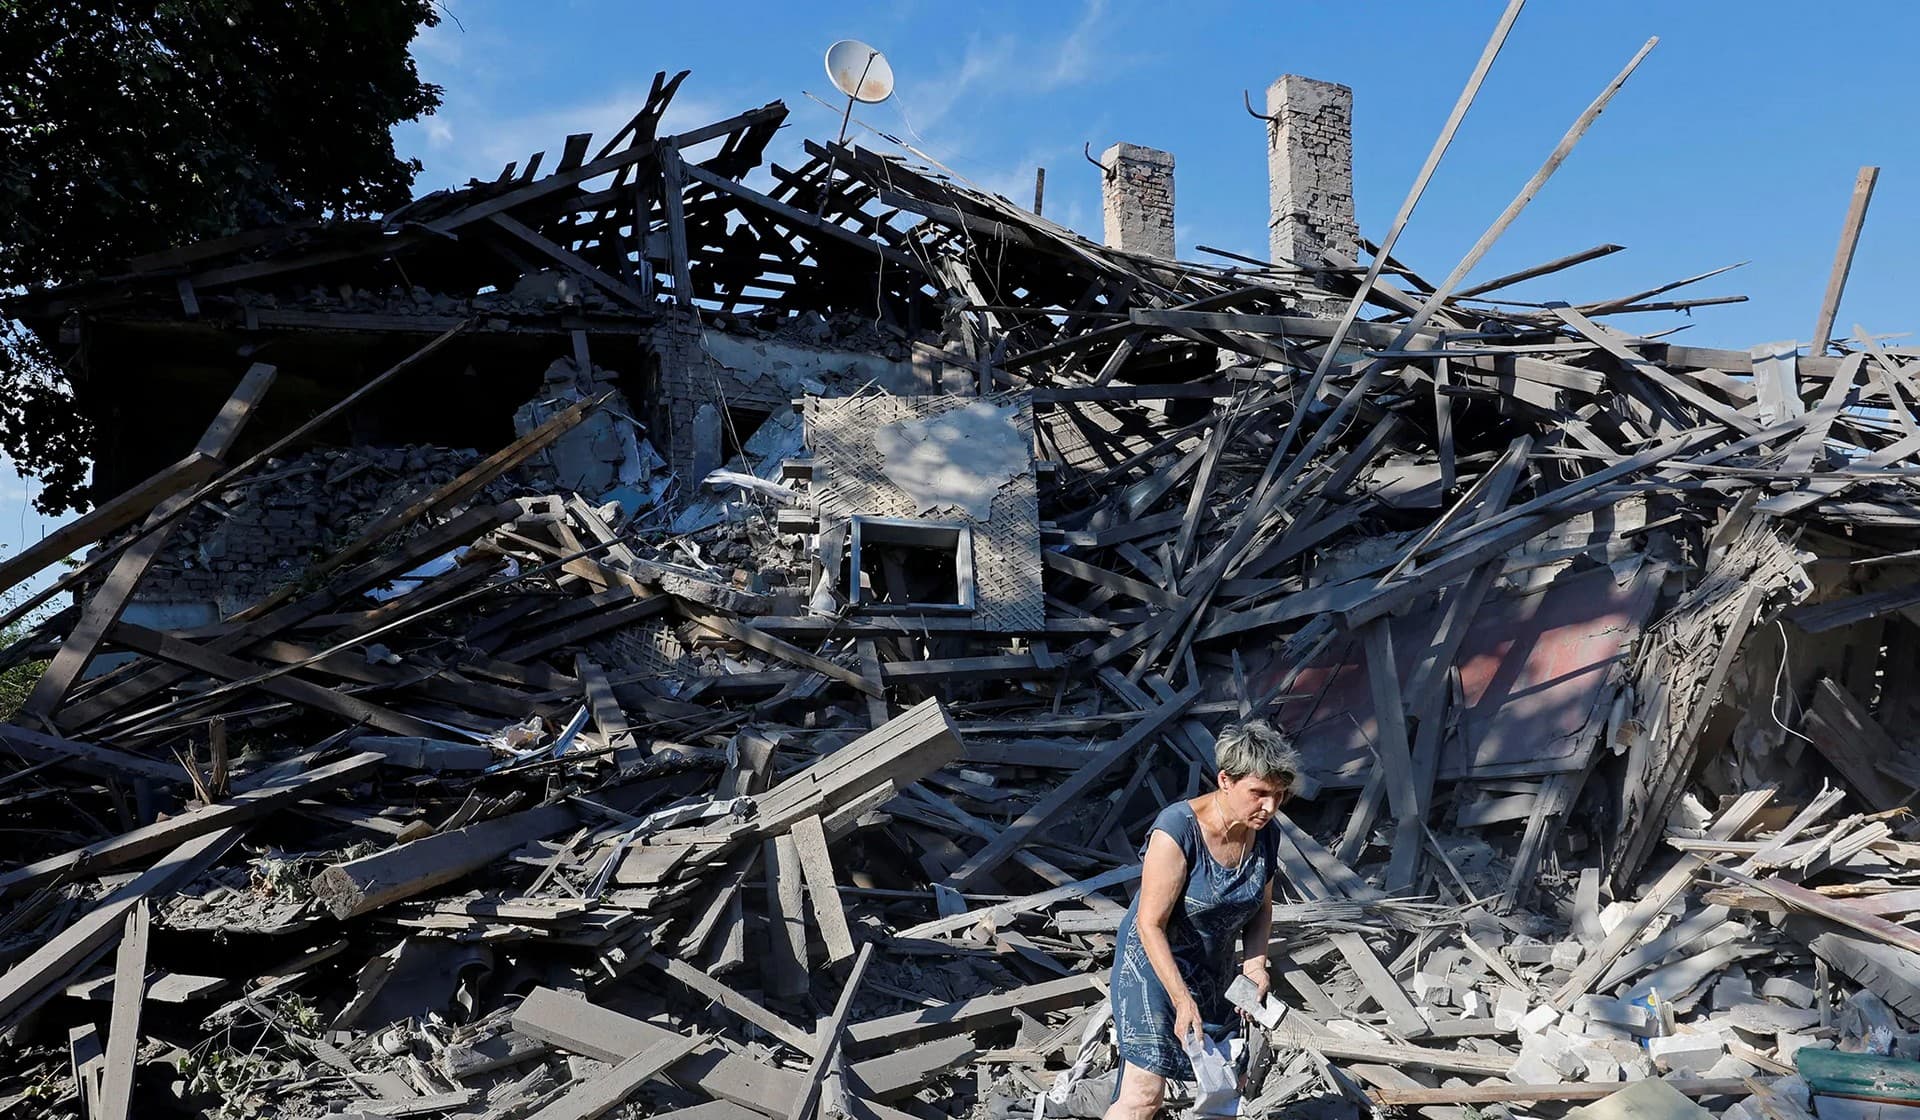 A woman searches for her belongings in the ruins of a house destroyed by recent shelling in Donetsk